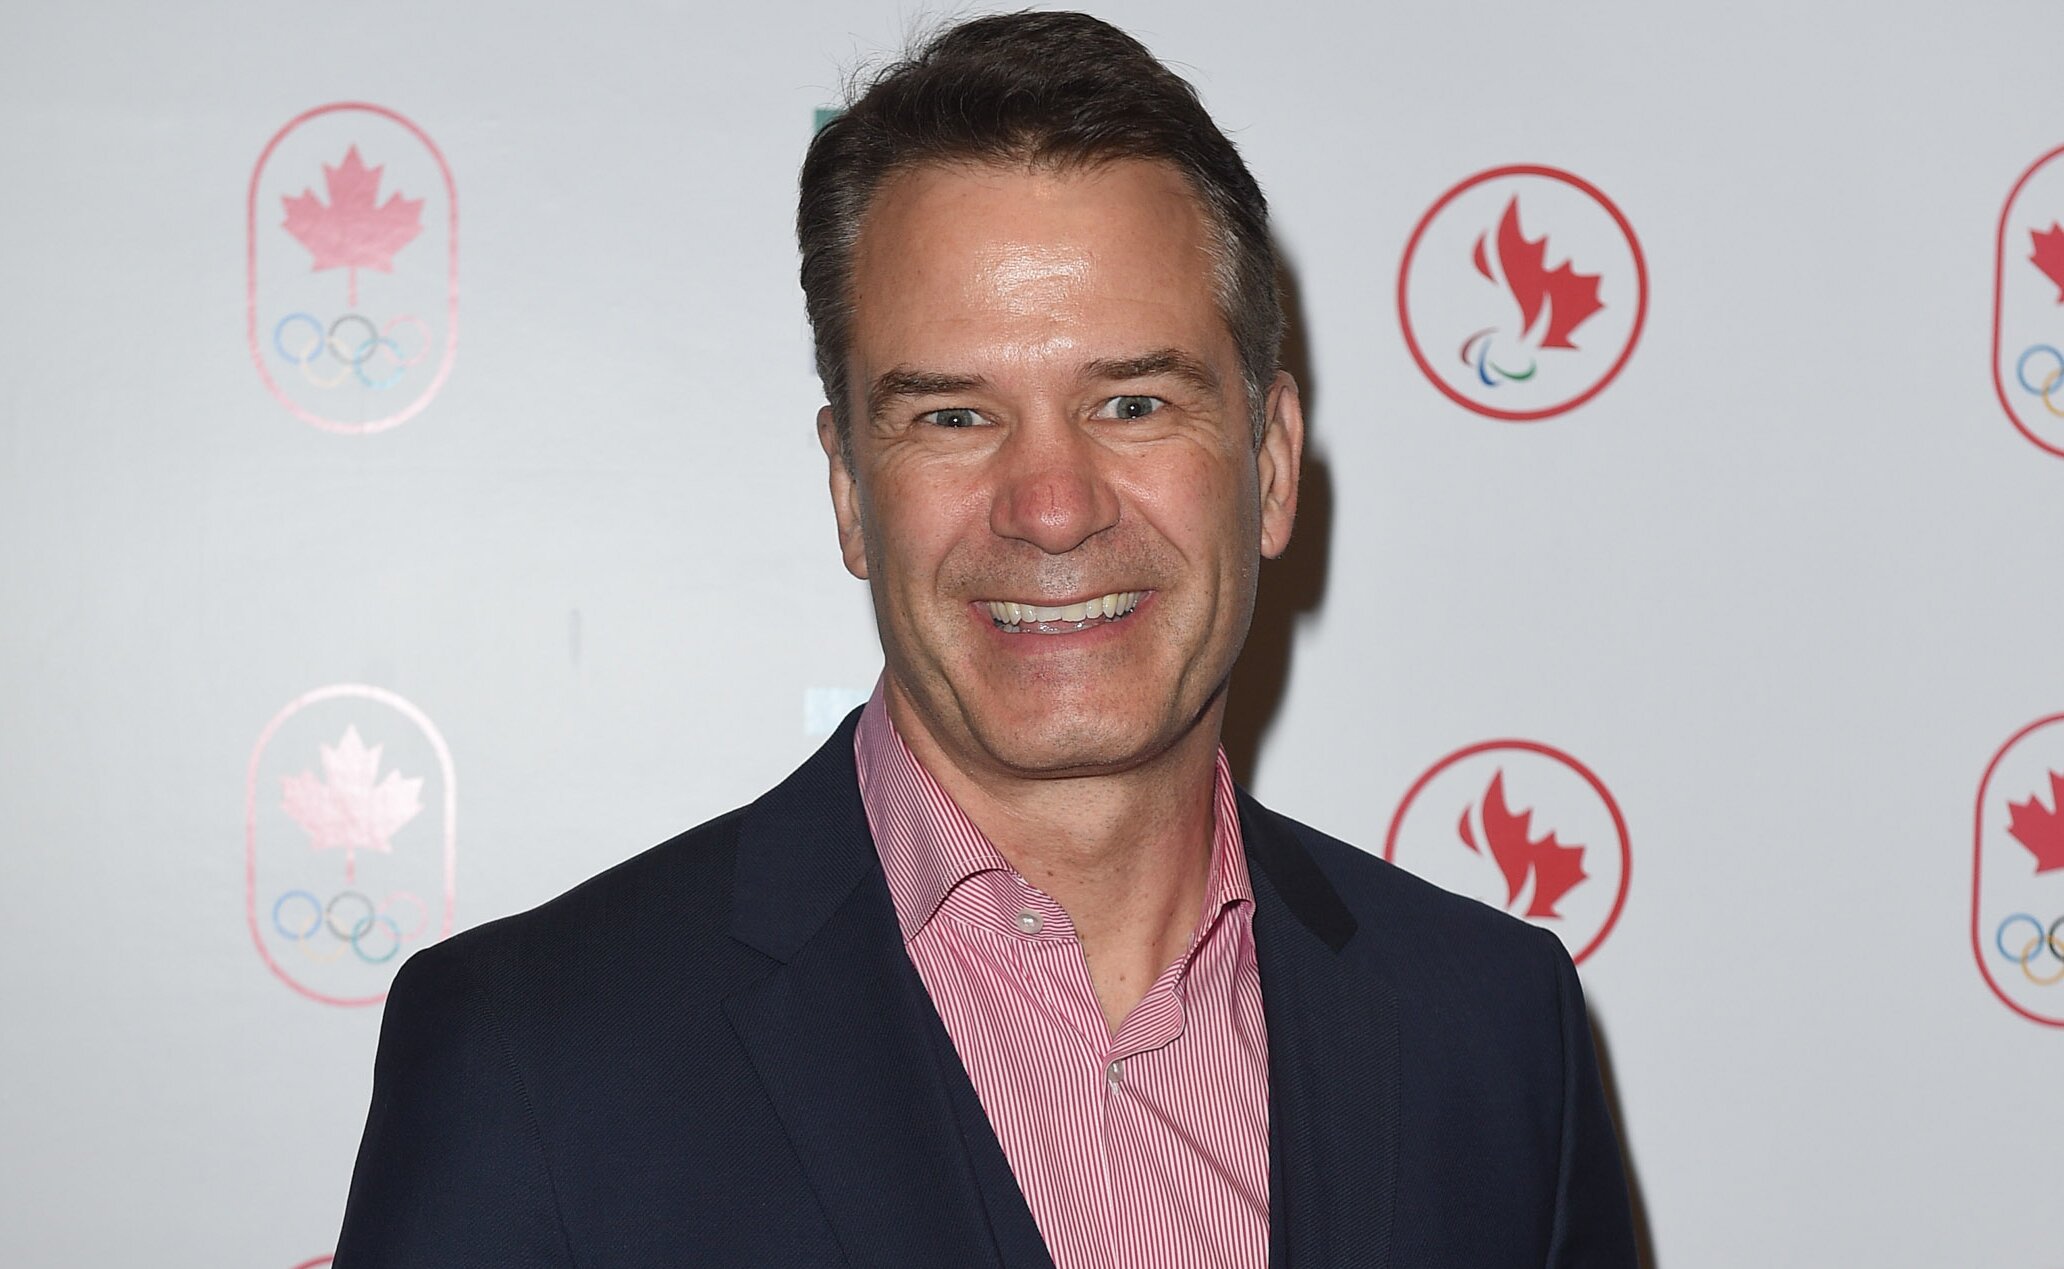 Chris Overholt attends the Hudson's Bay Company Launch of the Team Canada Collection For Rio 2016. (Photo courtesy of GettyImages)